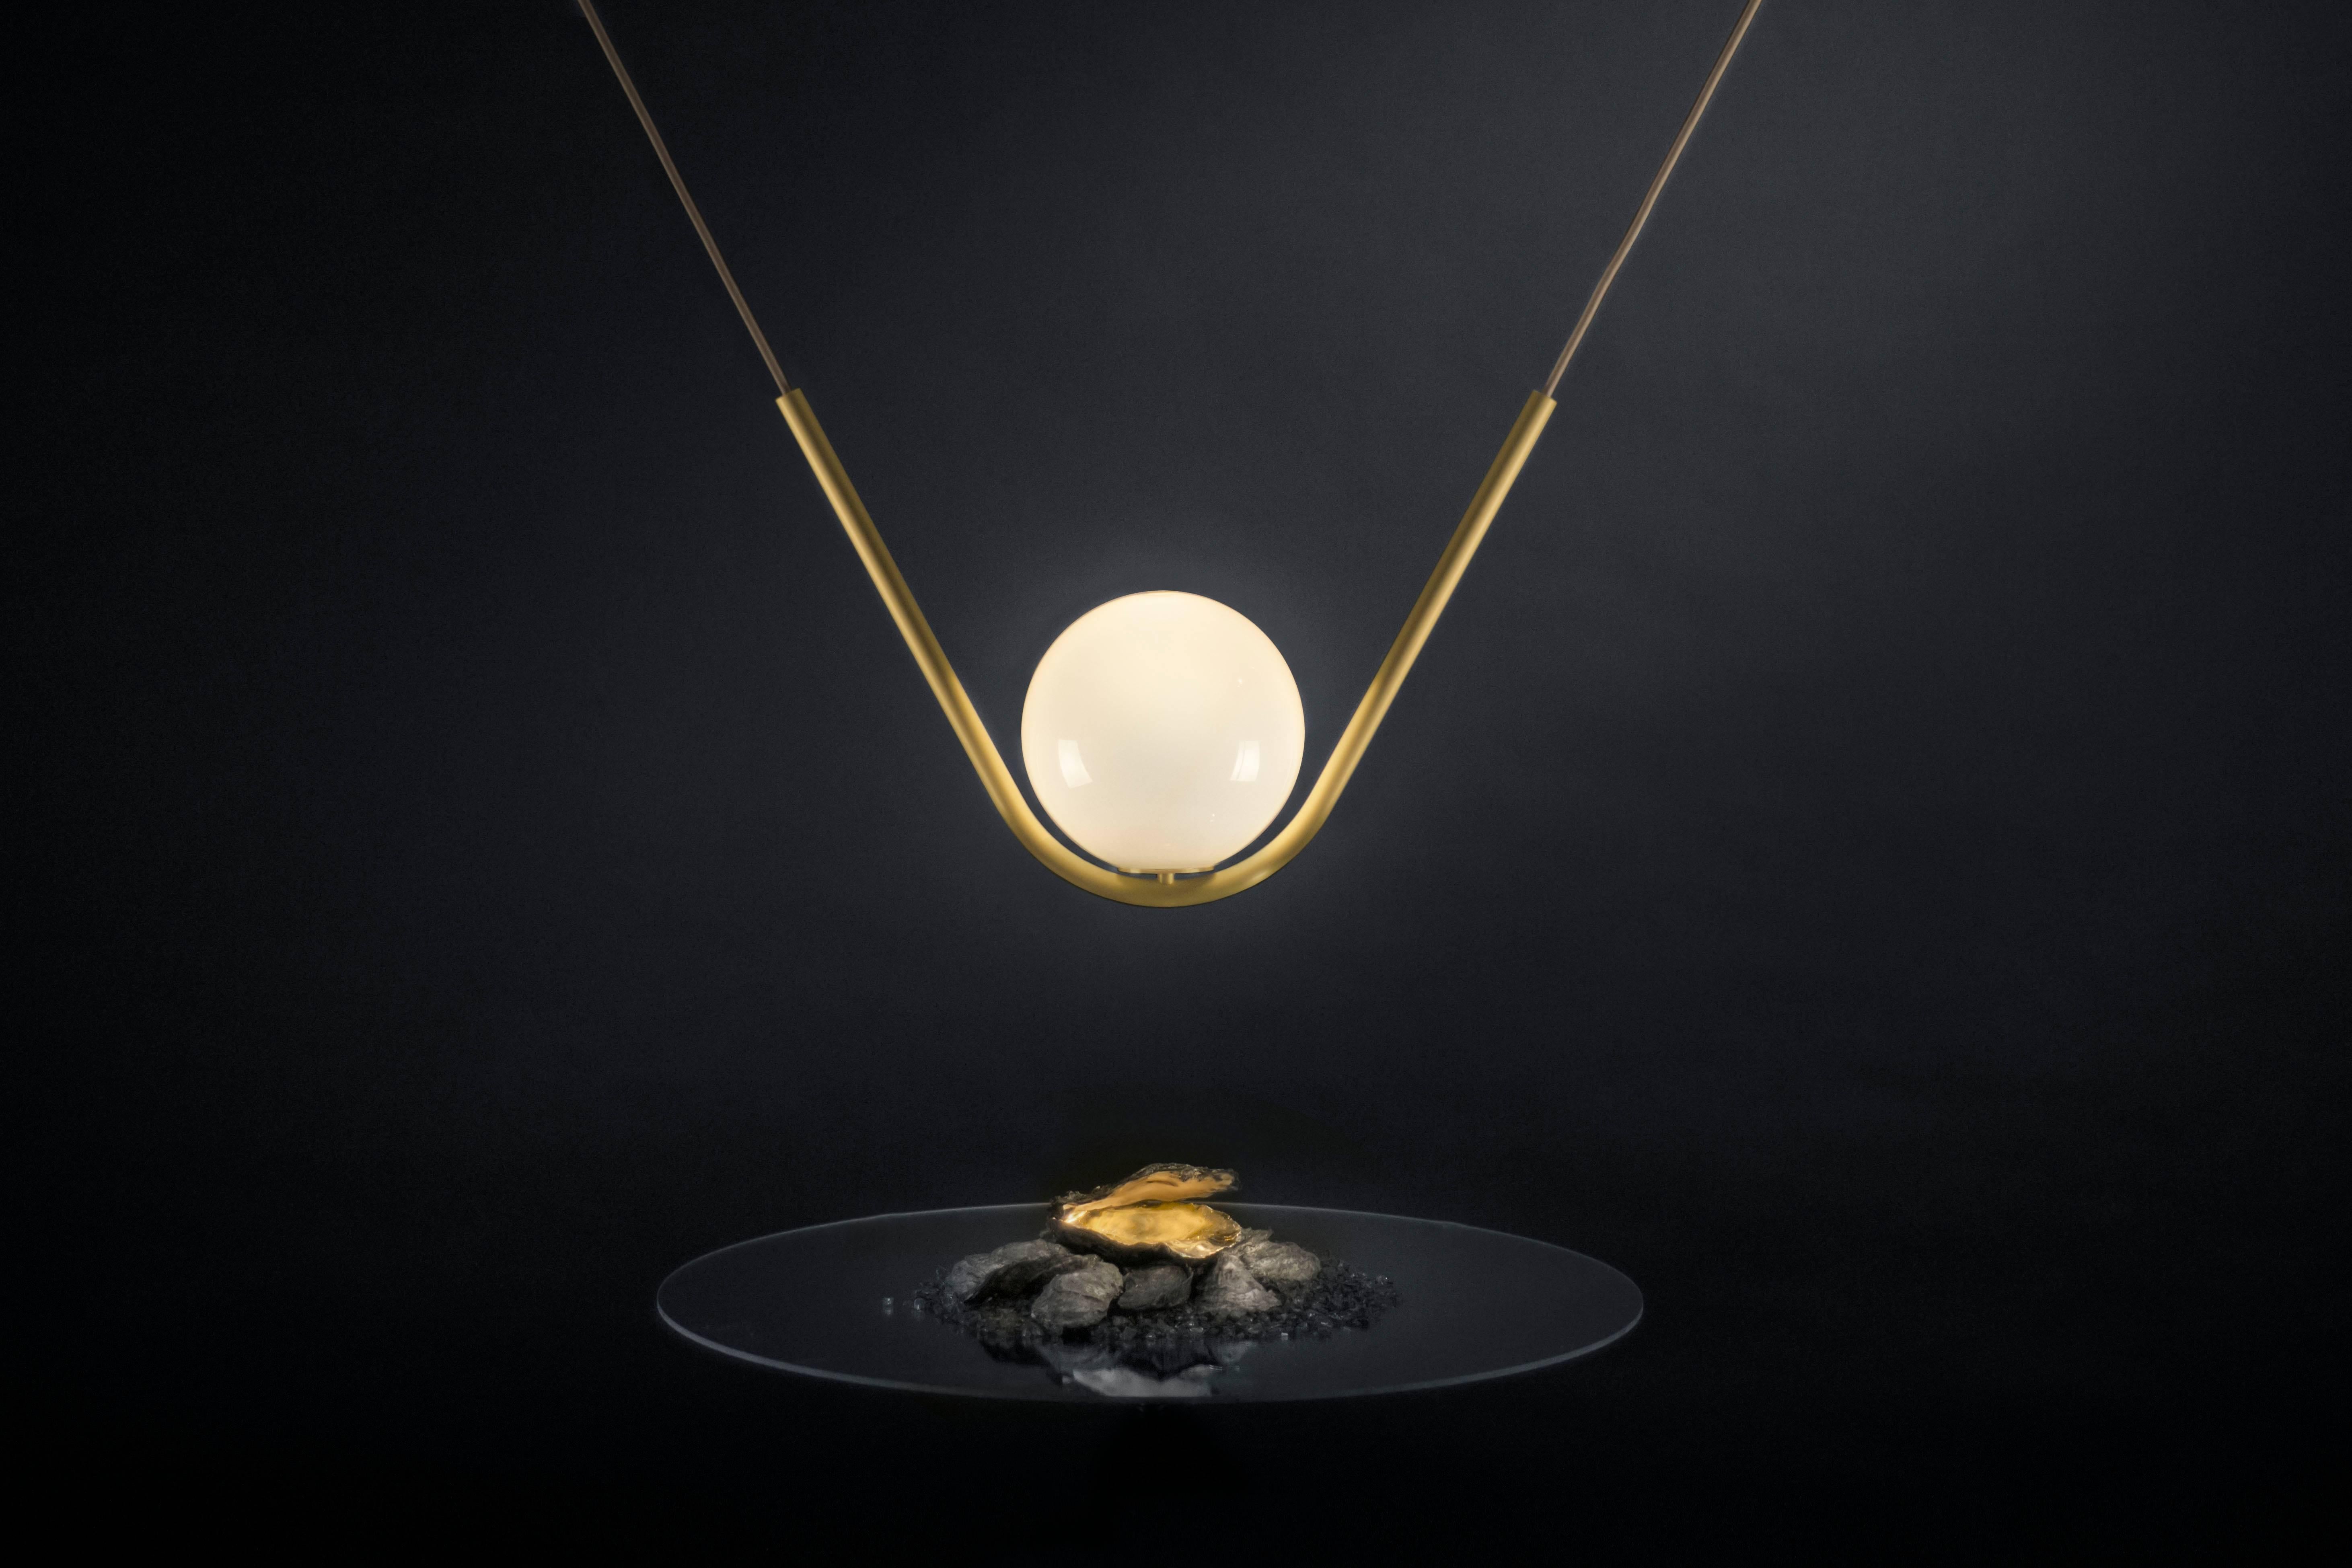 Perle 1 is a luxurious high-end lighting fixture that has been coated with warmth and elegance. Inspired by the romantic world of jewelry, the Perle collection is handcrafted with a delicate metallic structure and a 8’’ hand blown glass ball as the